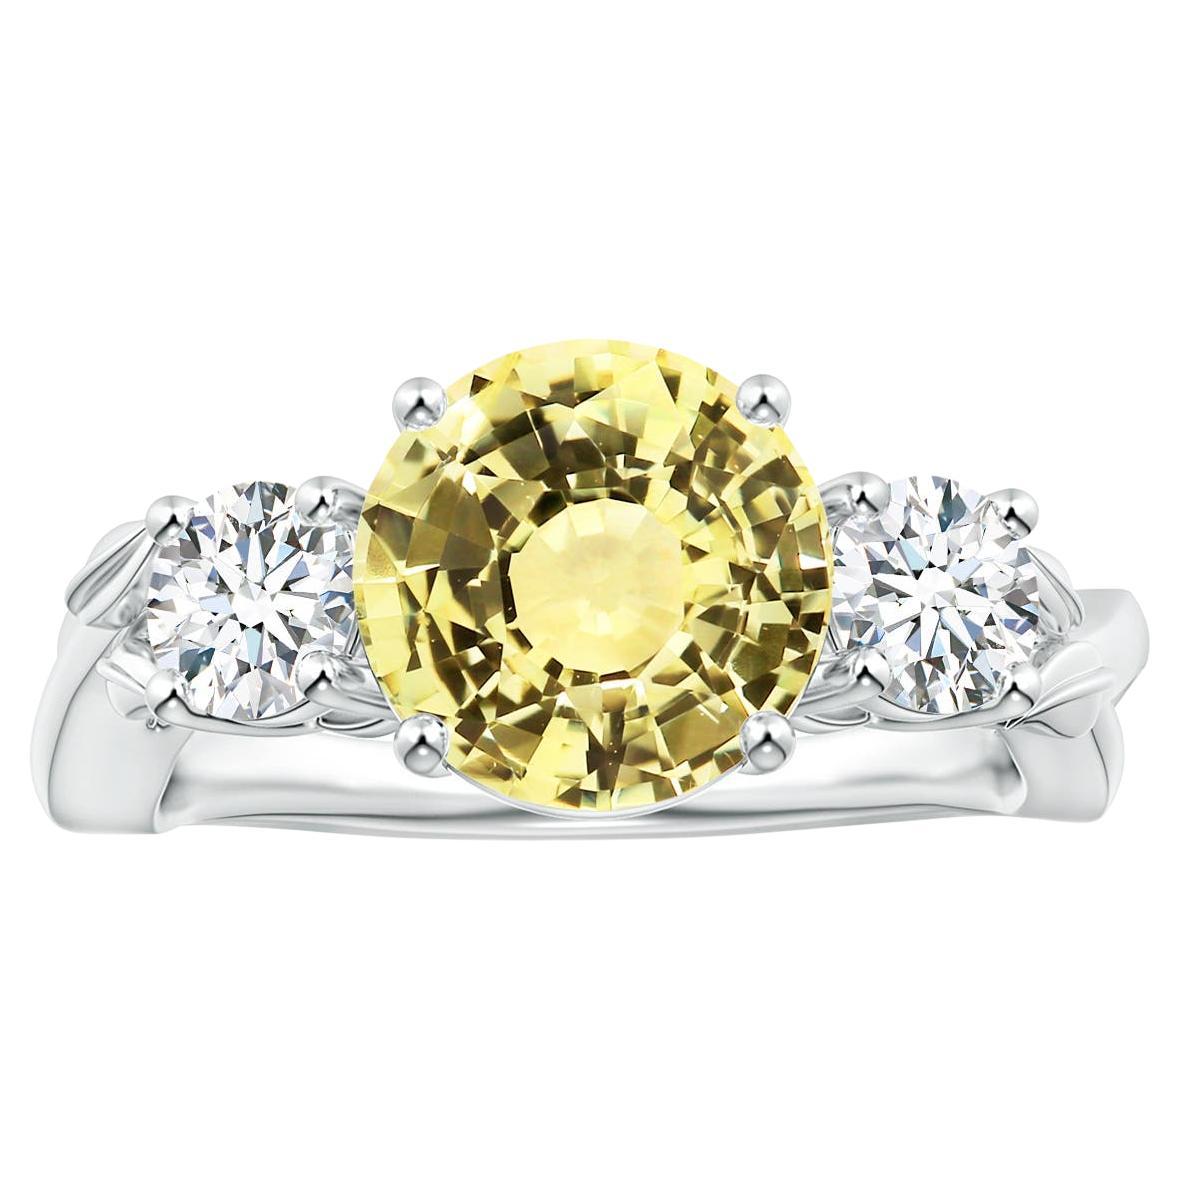 For Sale:  Angara Gia Certified Yellow Sapphire 3-Stone Ring in White Gold with Diamonds